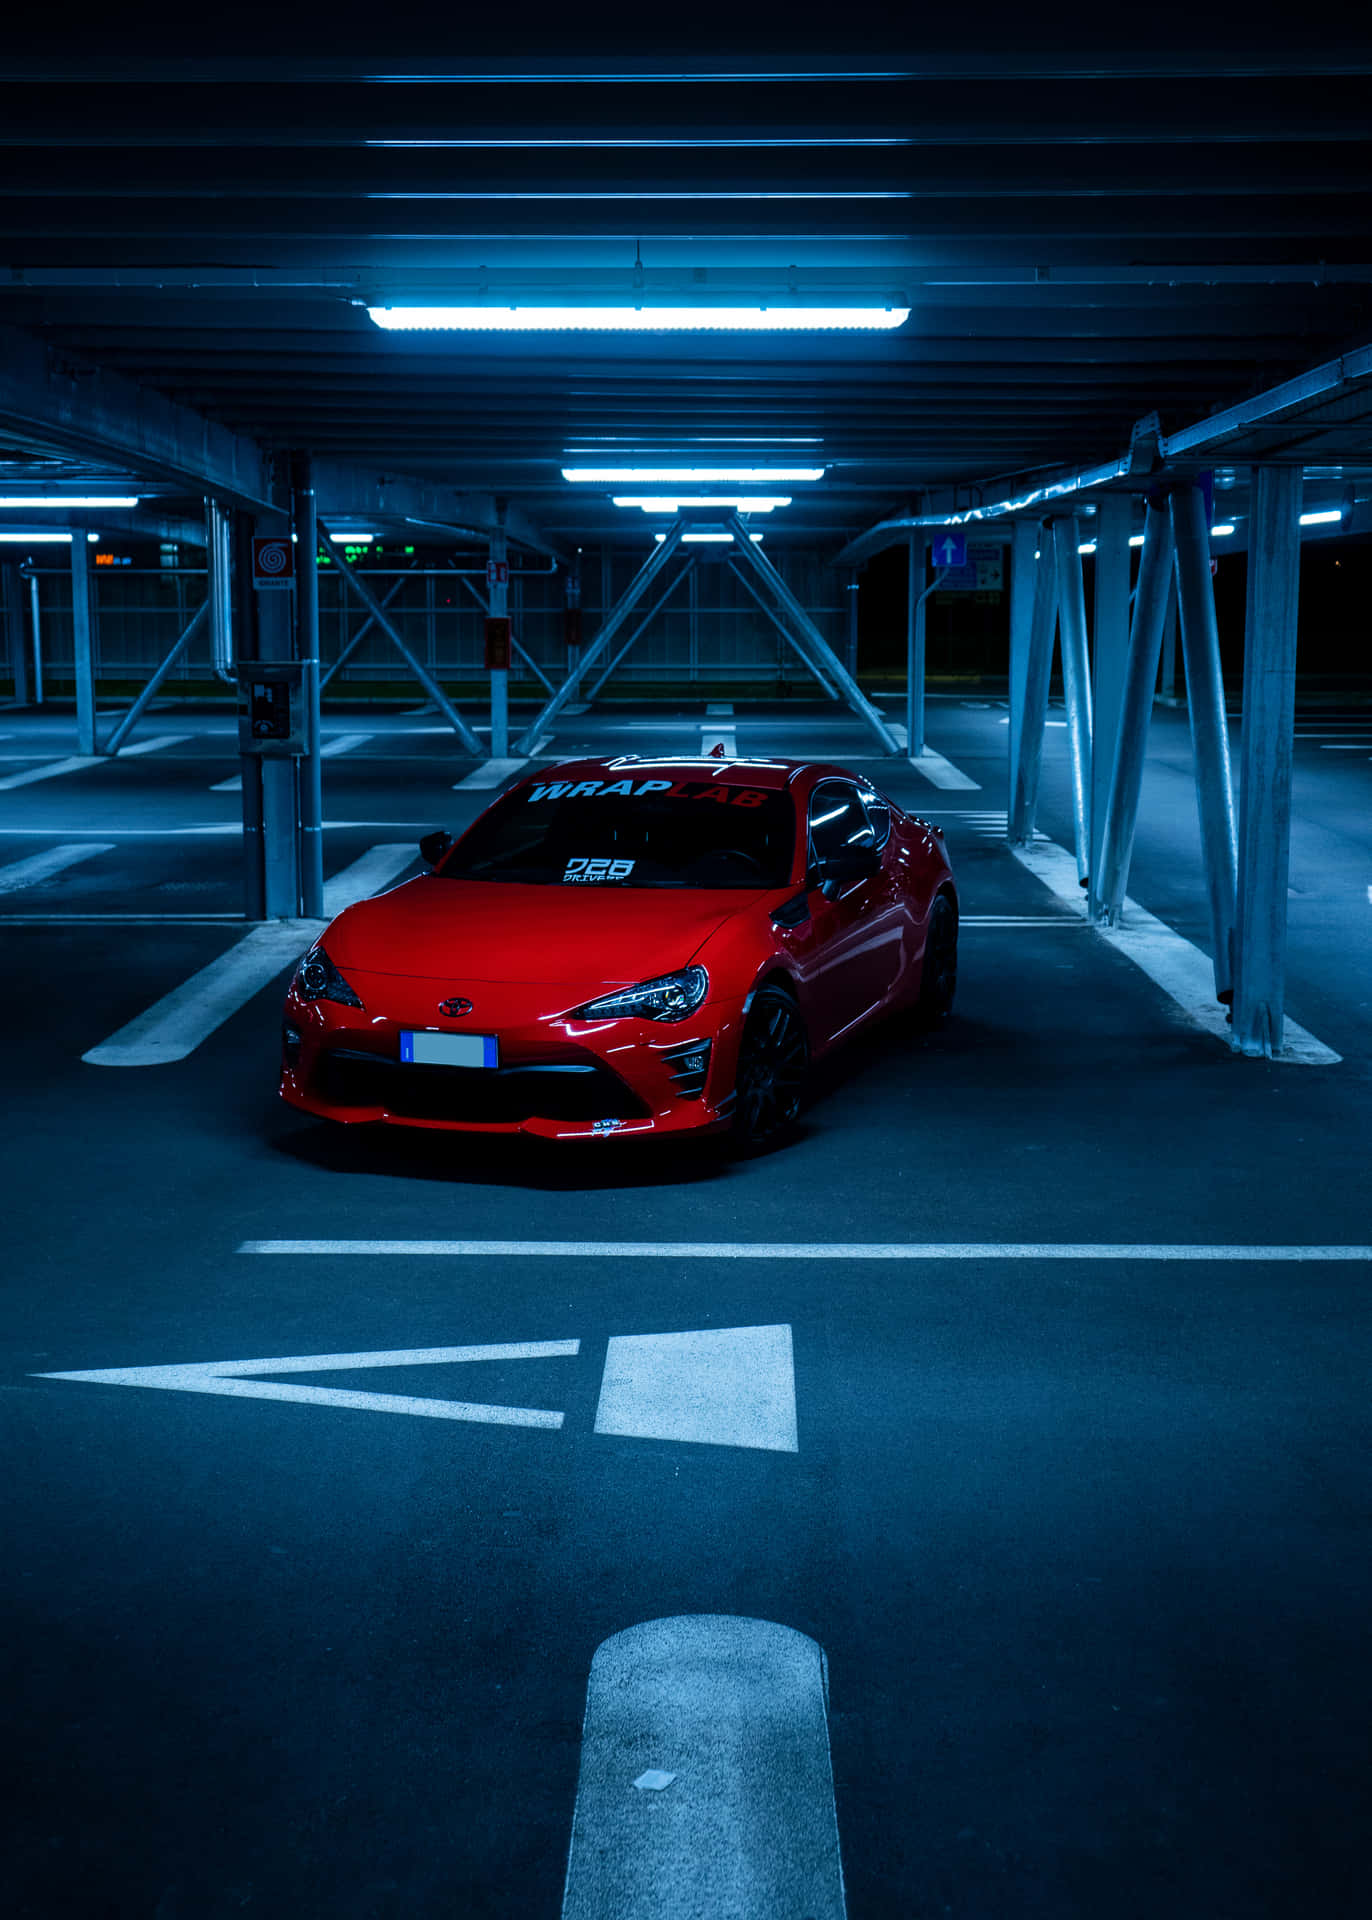 Feel the power and speed in the Toyota 86 Wallpaper